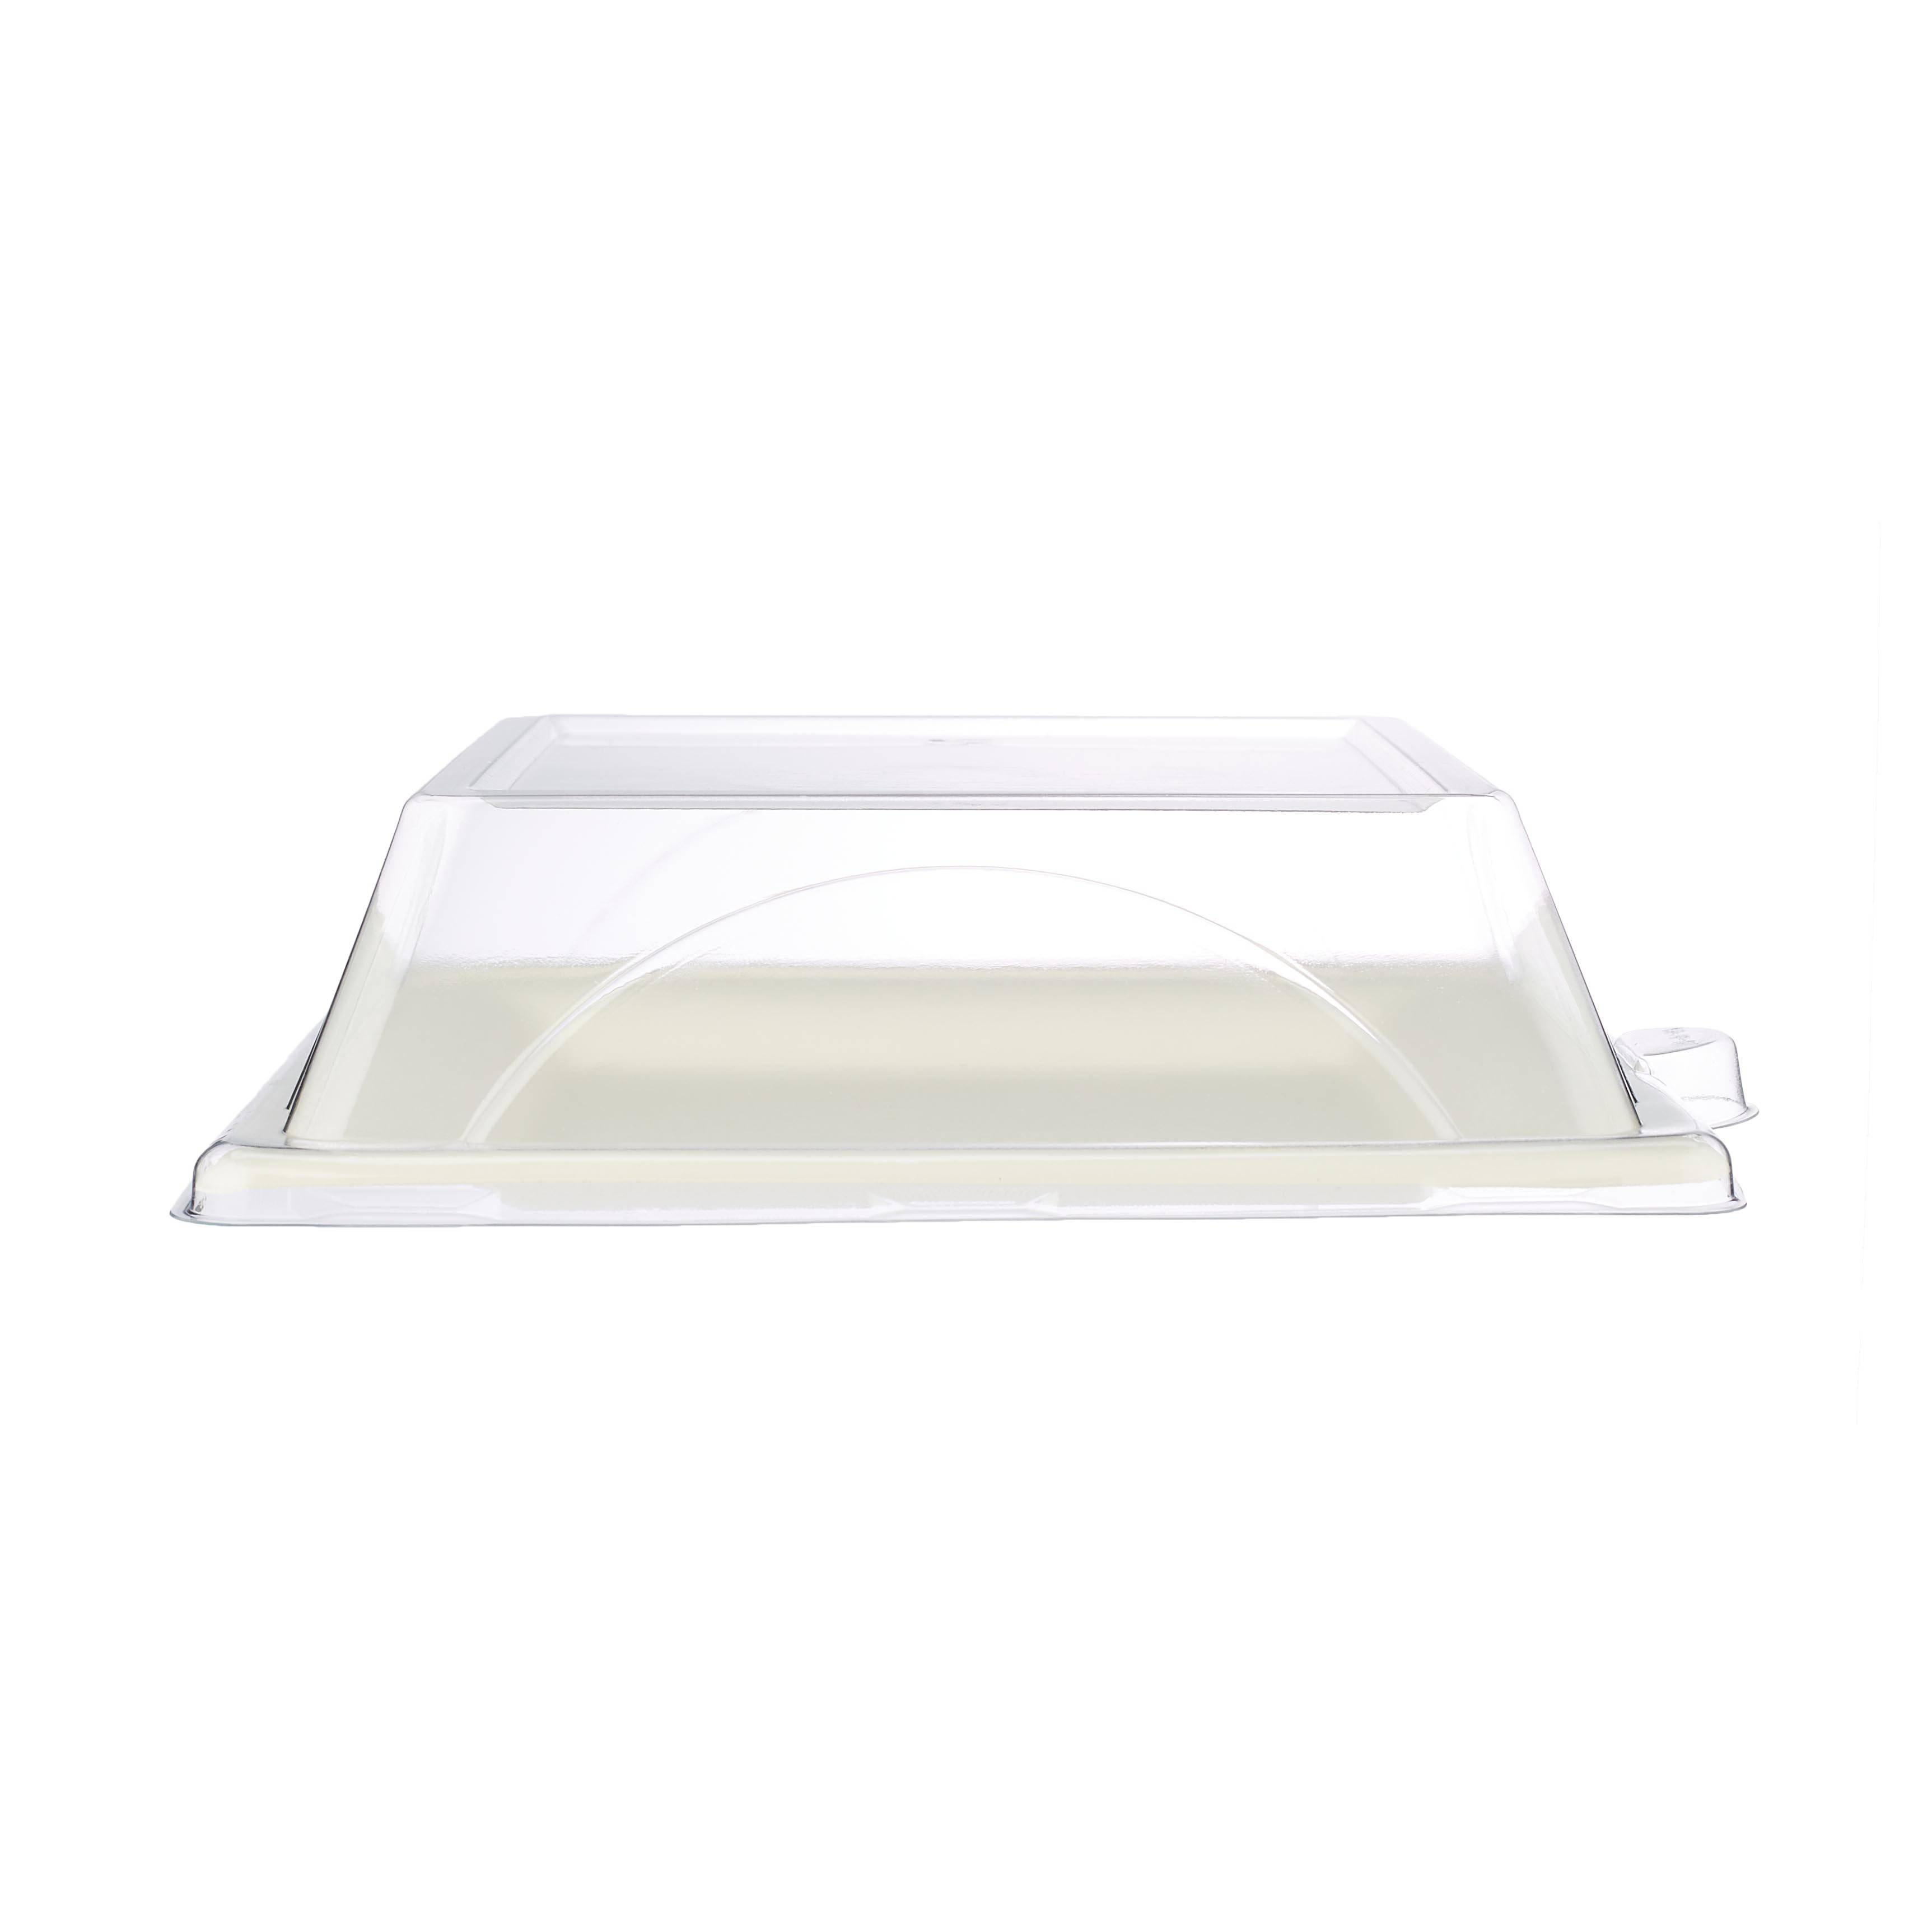 200 Pieces Bio-Degradable Square Plate With Lid 10 Inch - Hotpack